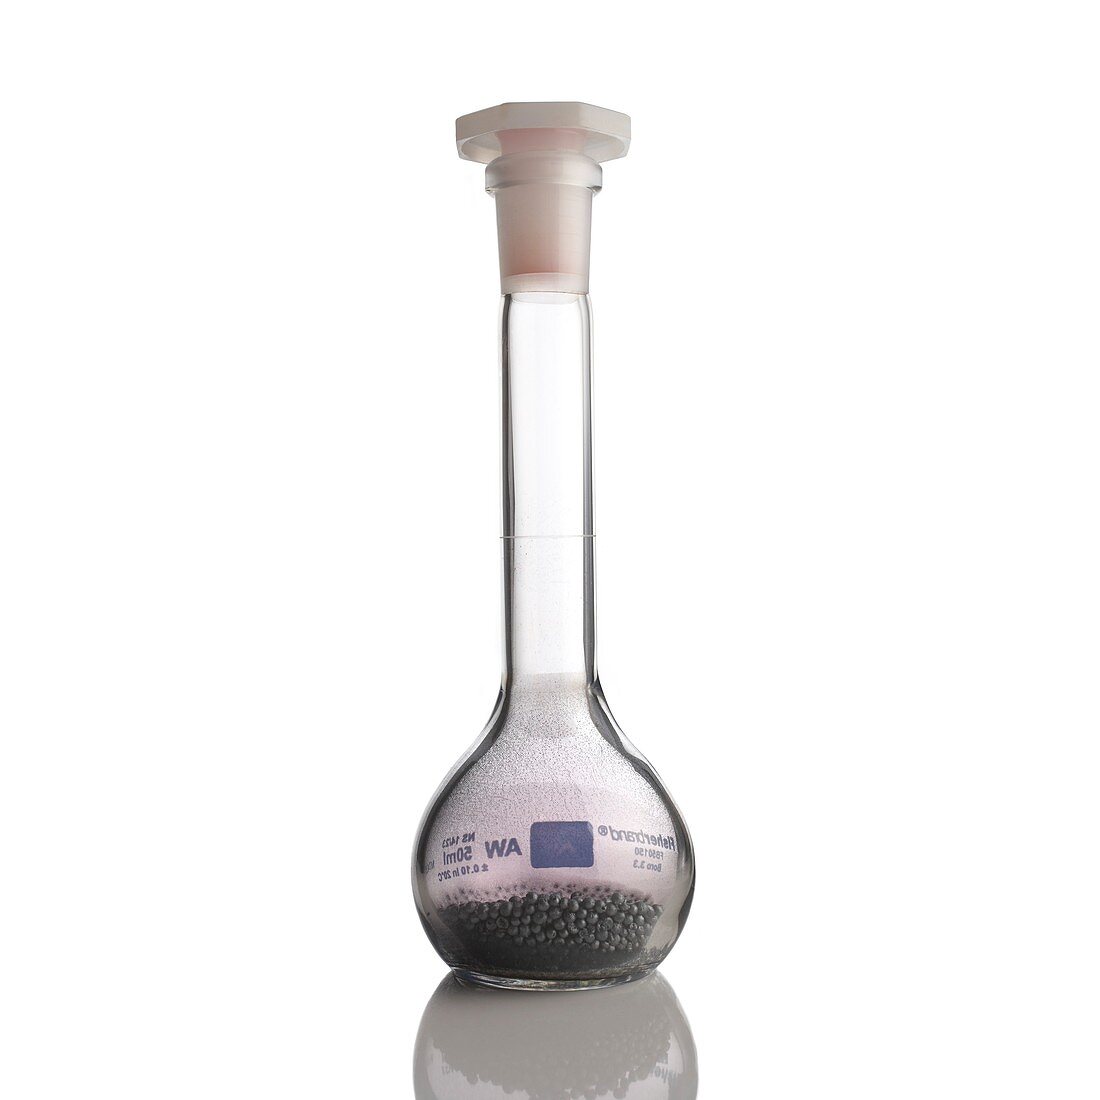 Iodine in a flask